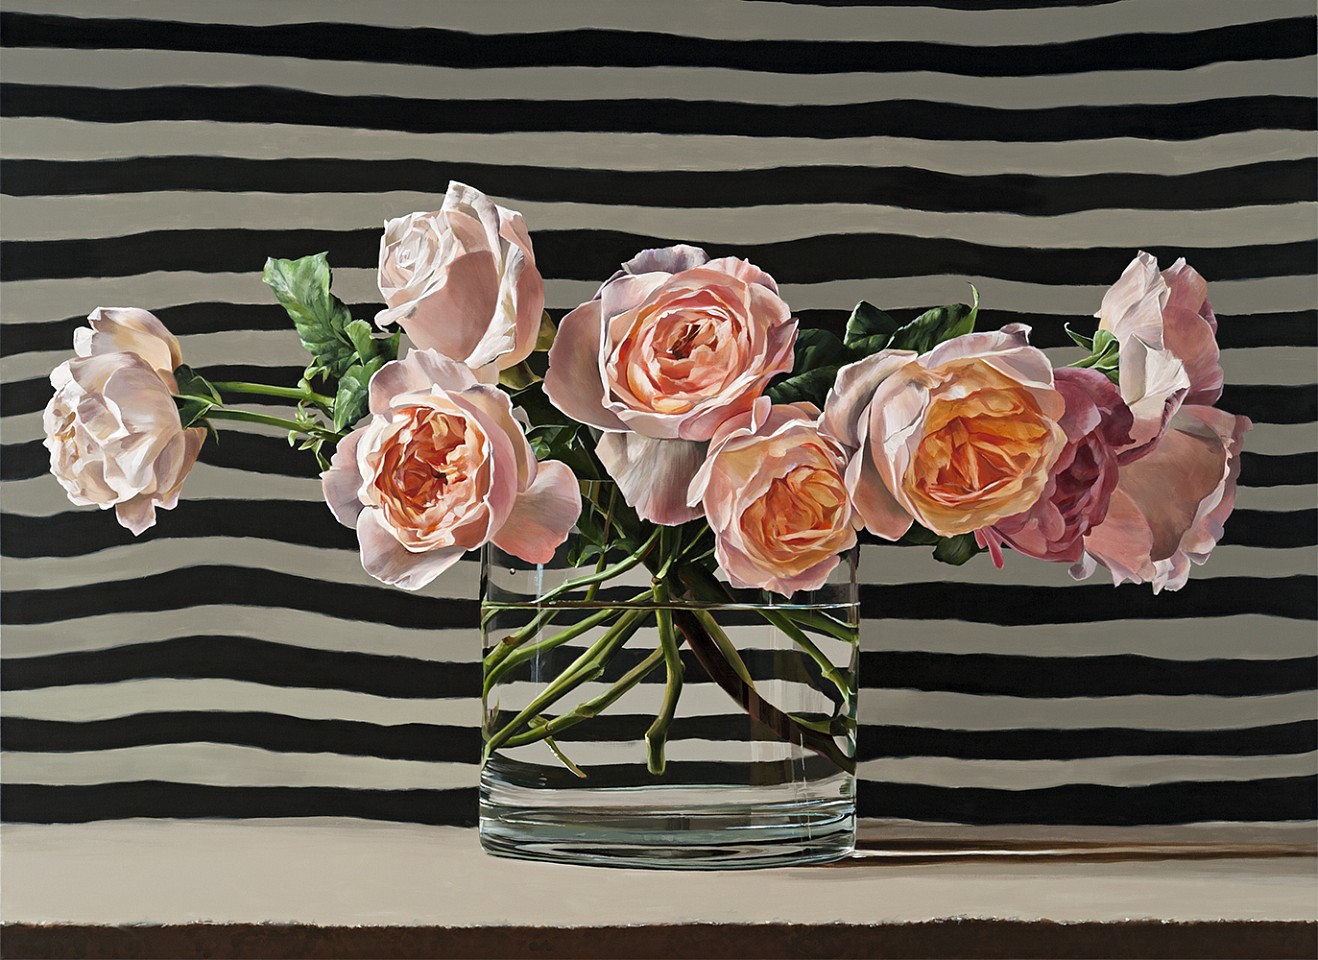 Ben Schonzeit, Roses with Stripes, 2015
Acrylic on canvas
SCHO0146